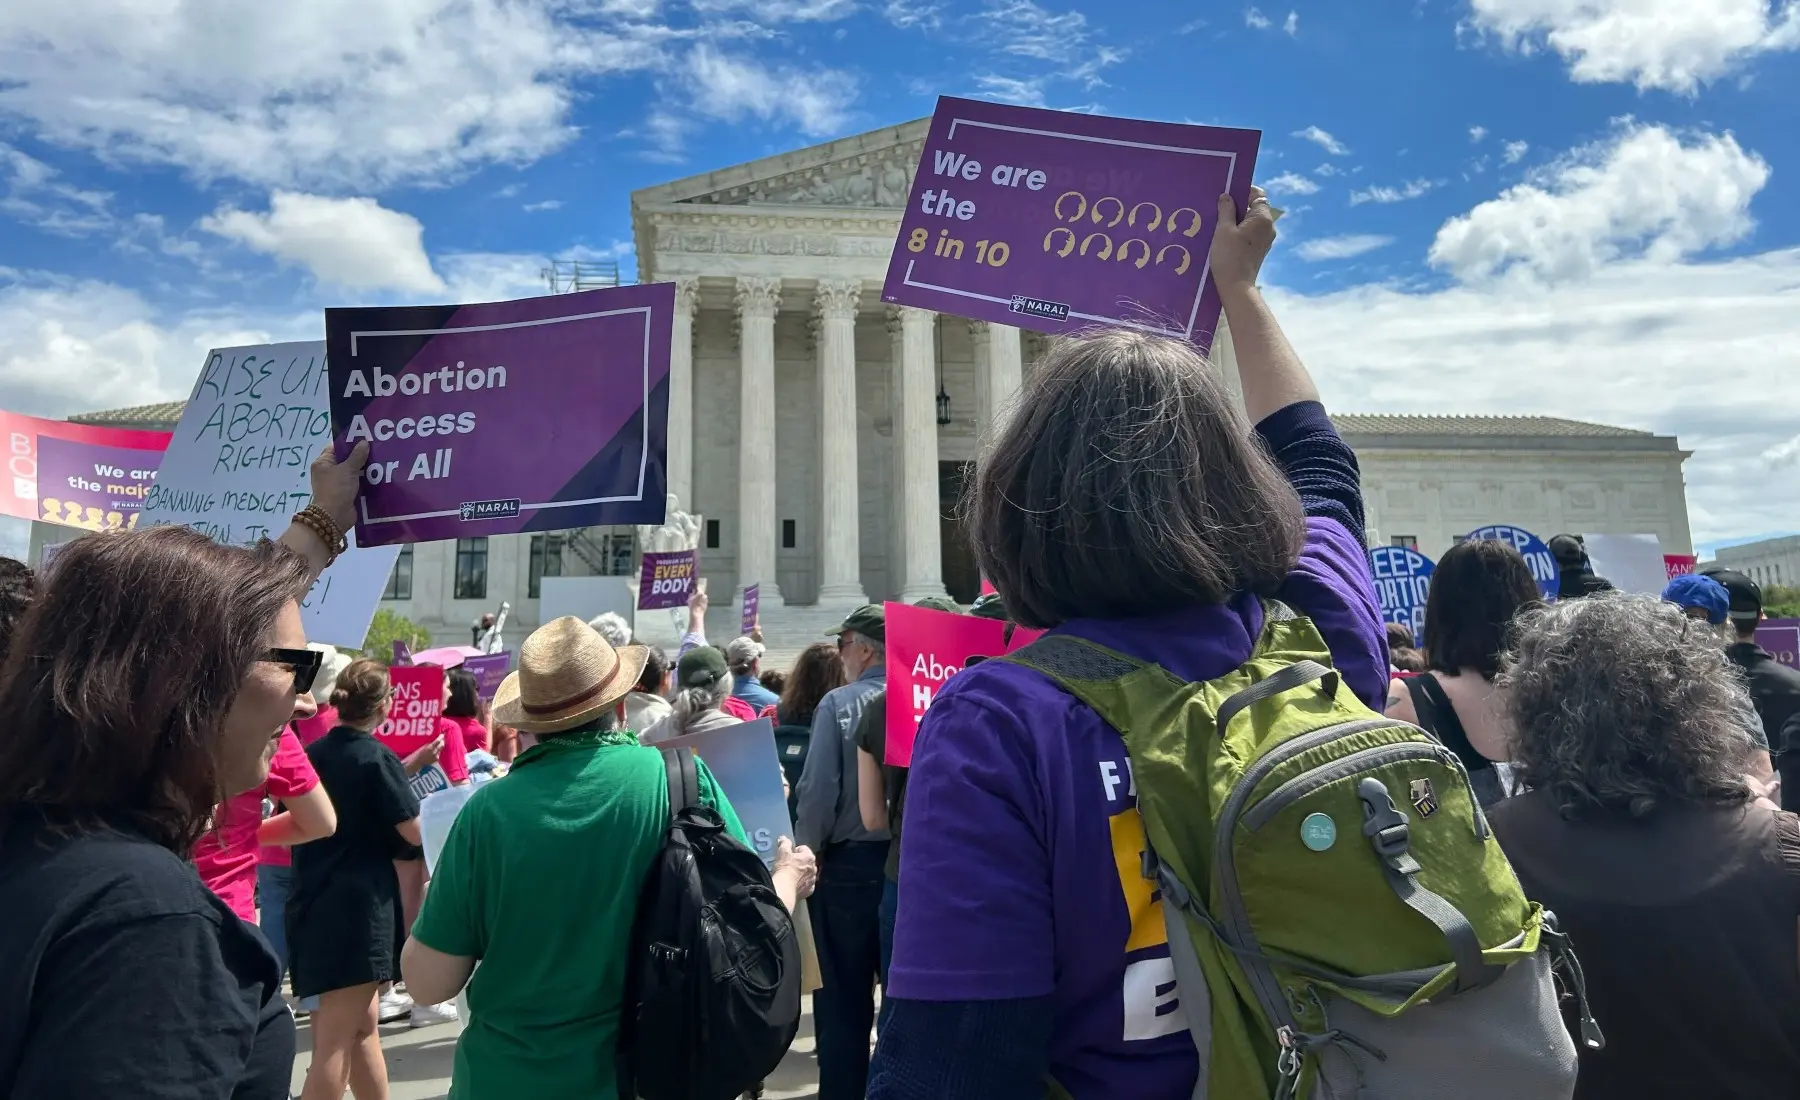 Members hold up reproductive freedom signs with their backs to the camera, facing the U.S. Supreme Court within a crowd.